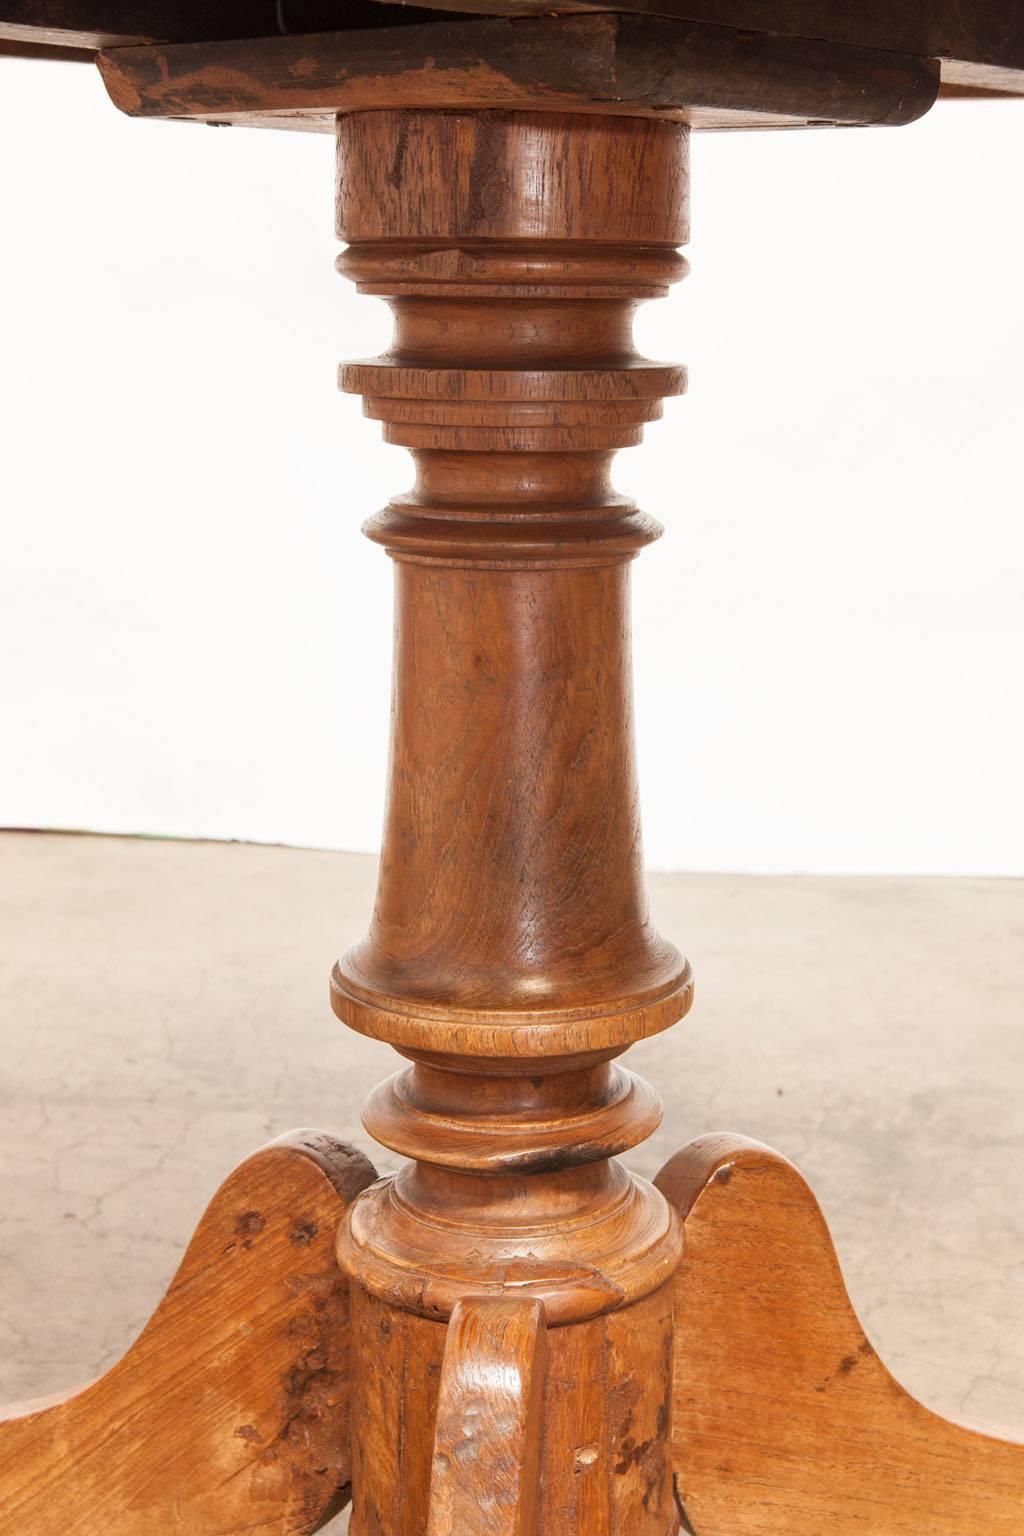 Rustic carved walnut side table made in the George III period featuring a thick turned column supported by graceful scrolled legs. Lovely patina lightened from age with a strong sturdy base.